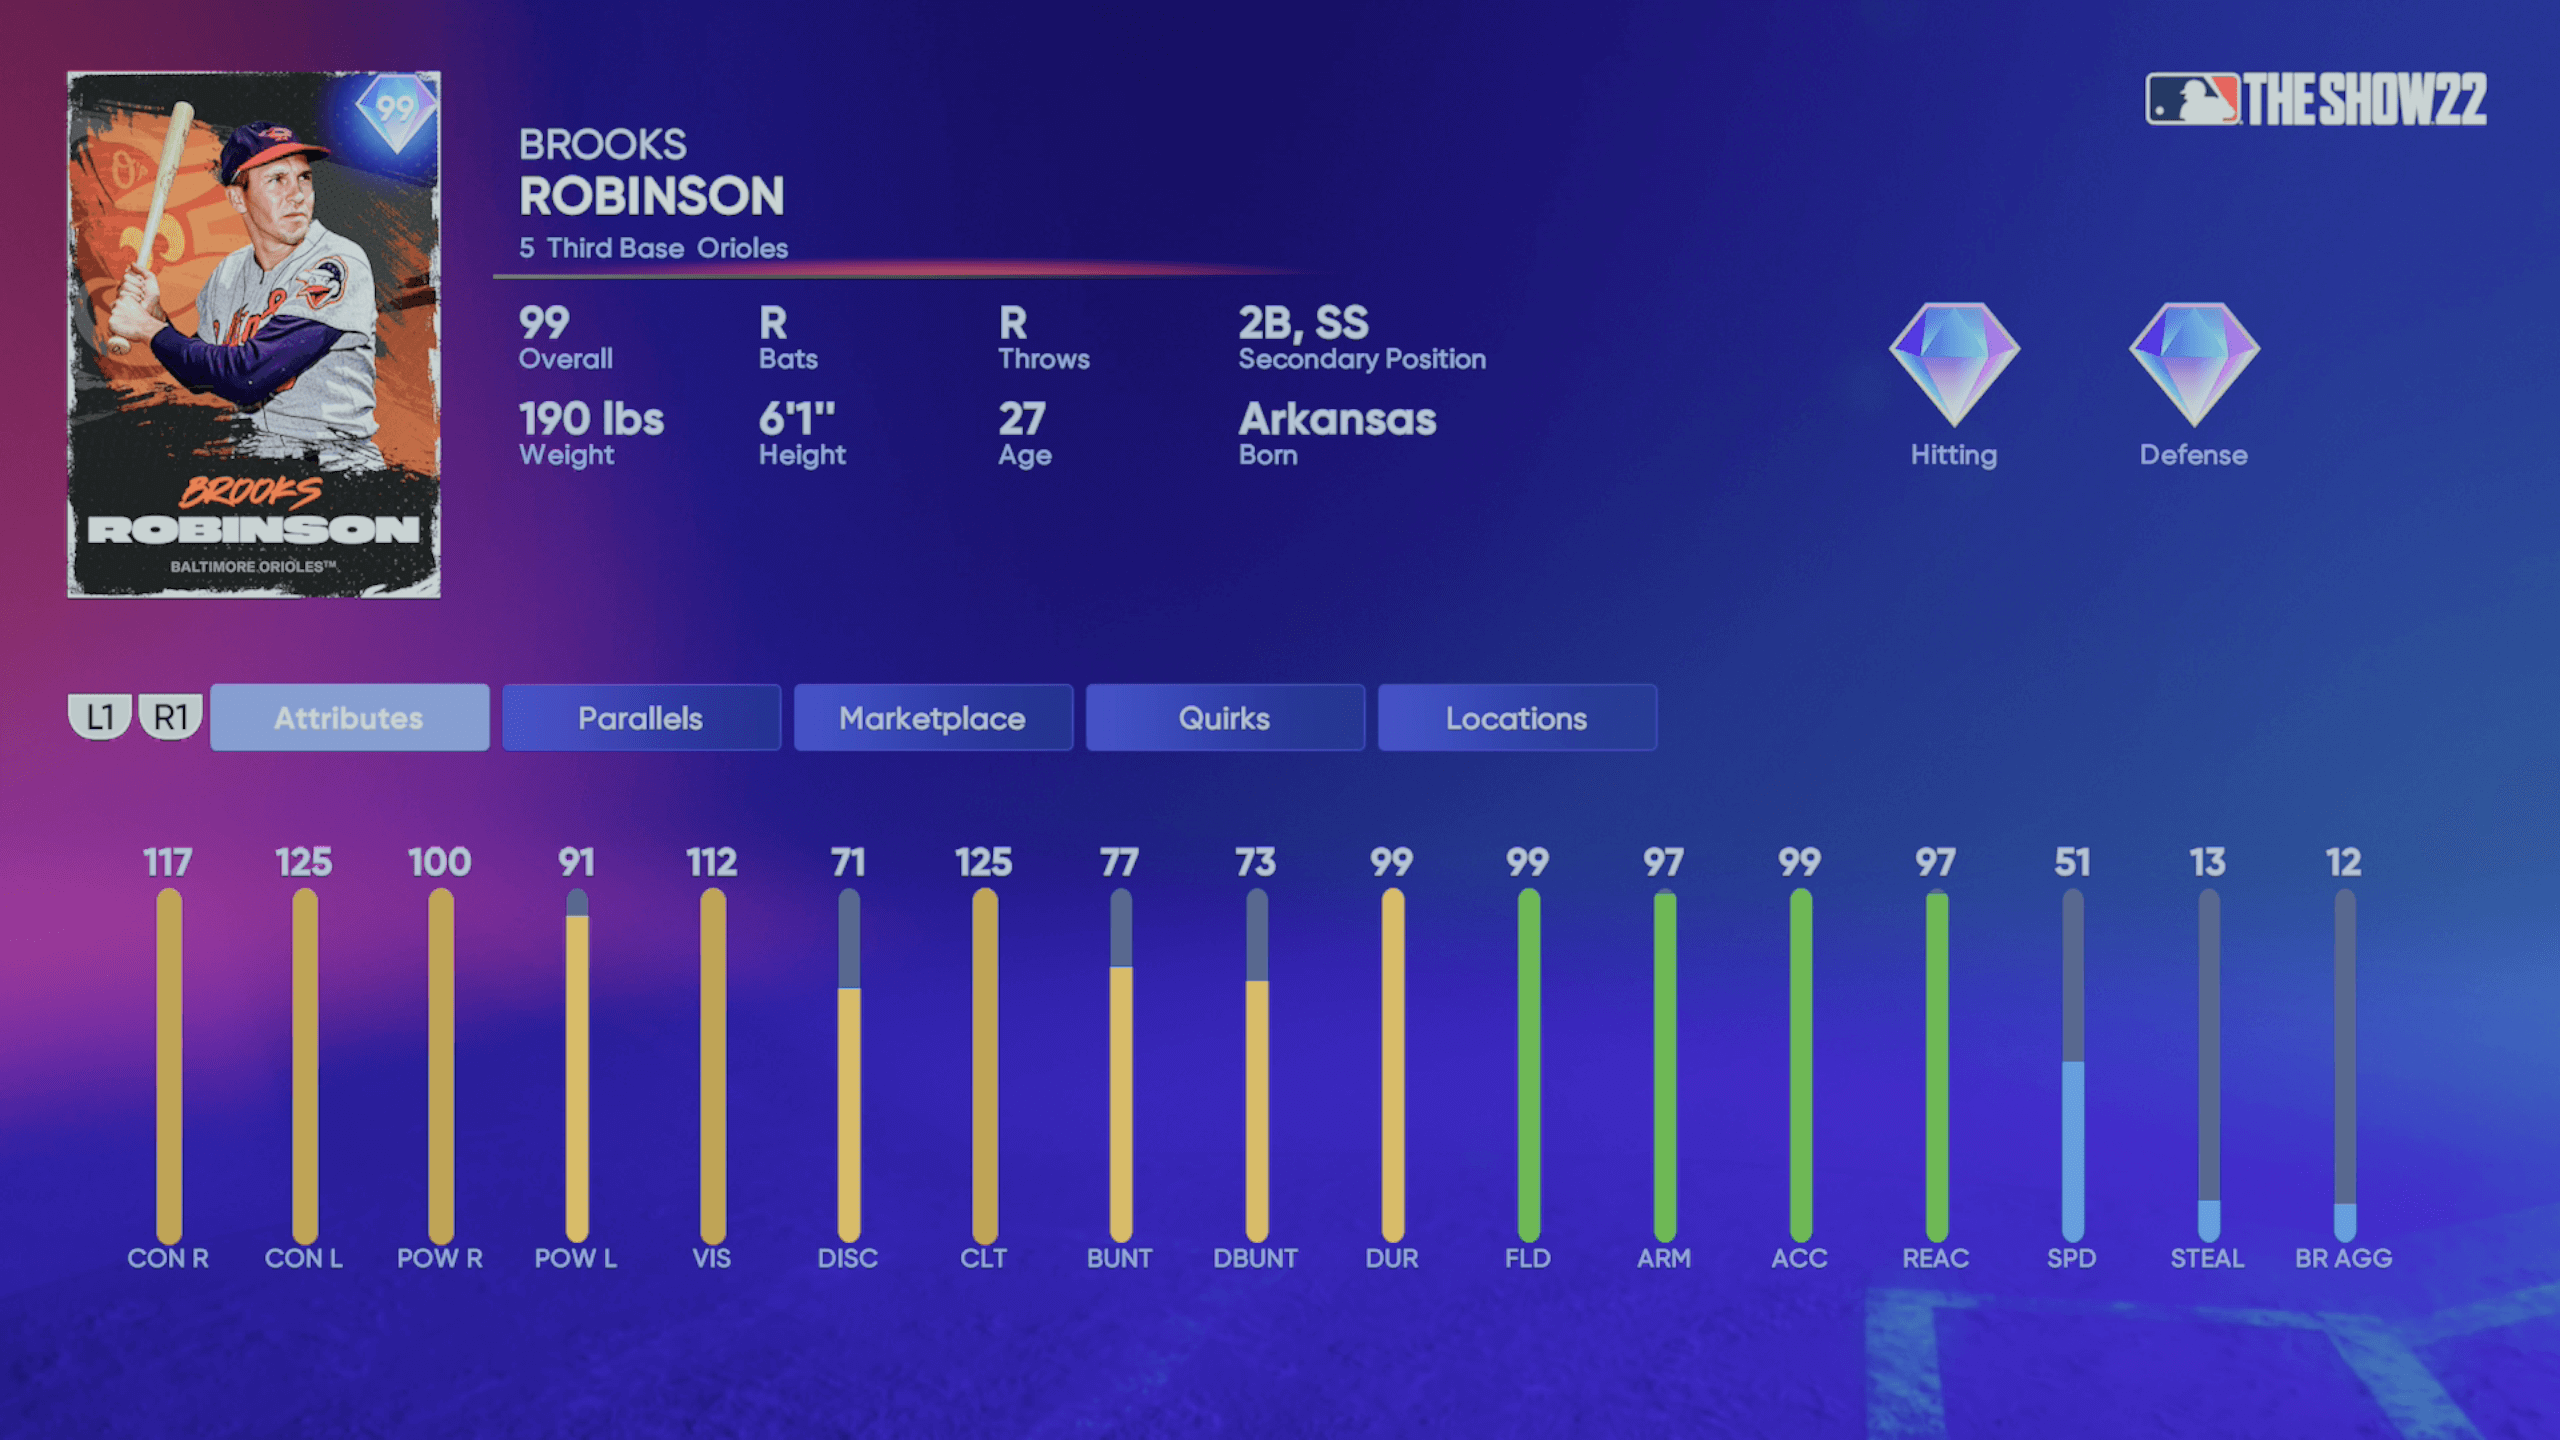 MLB® The Show™ - Legends of the Franchise Featured Program